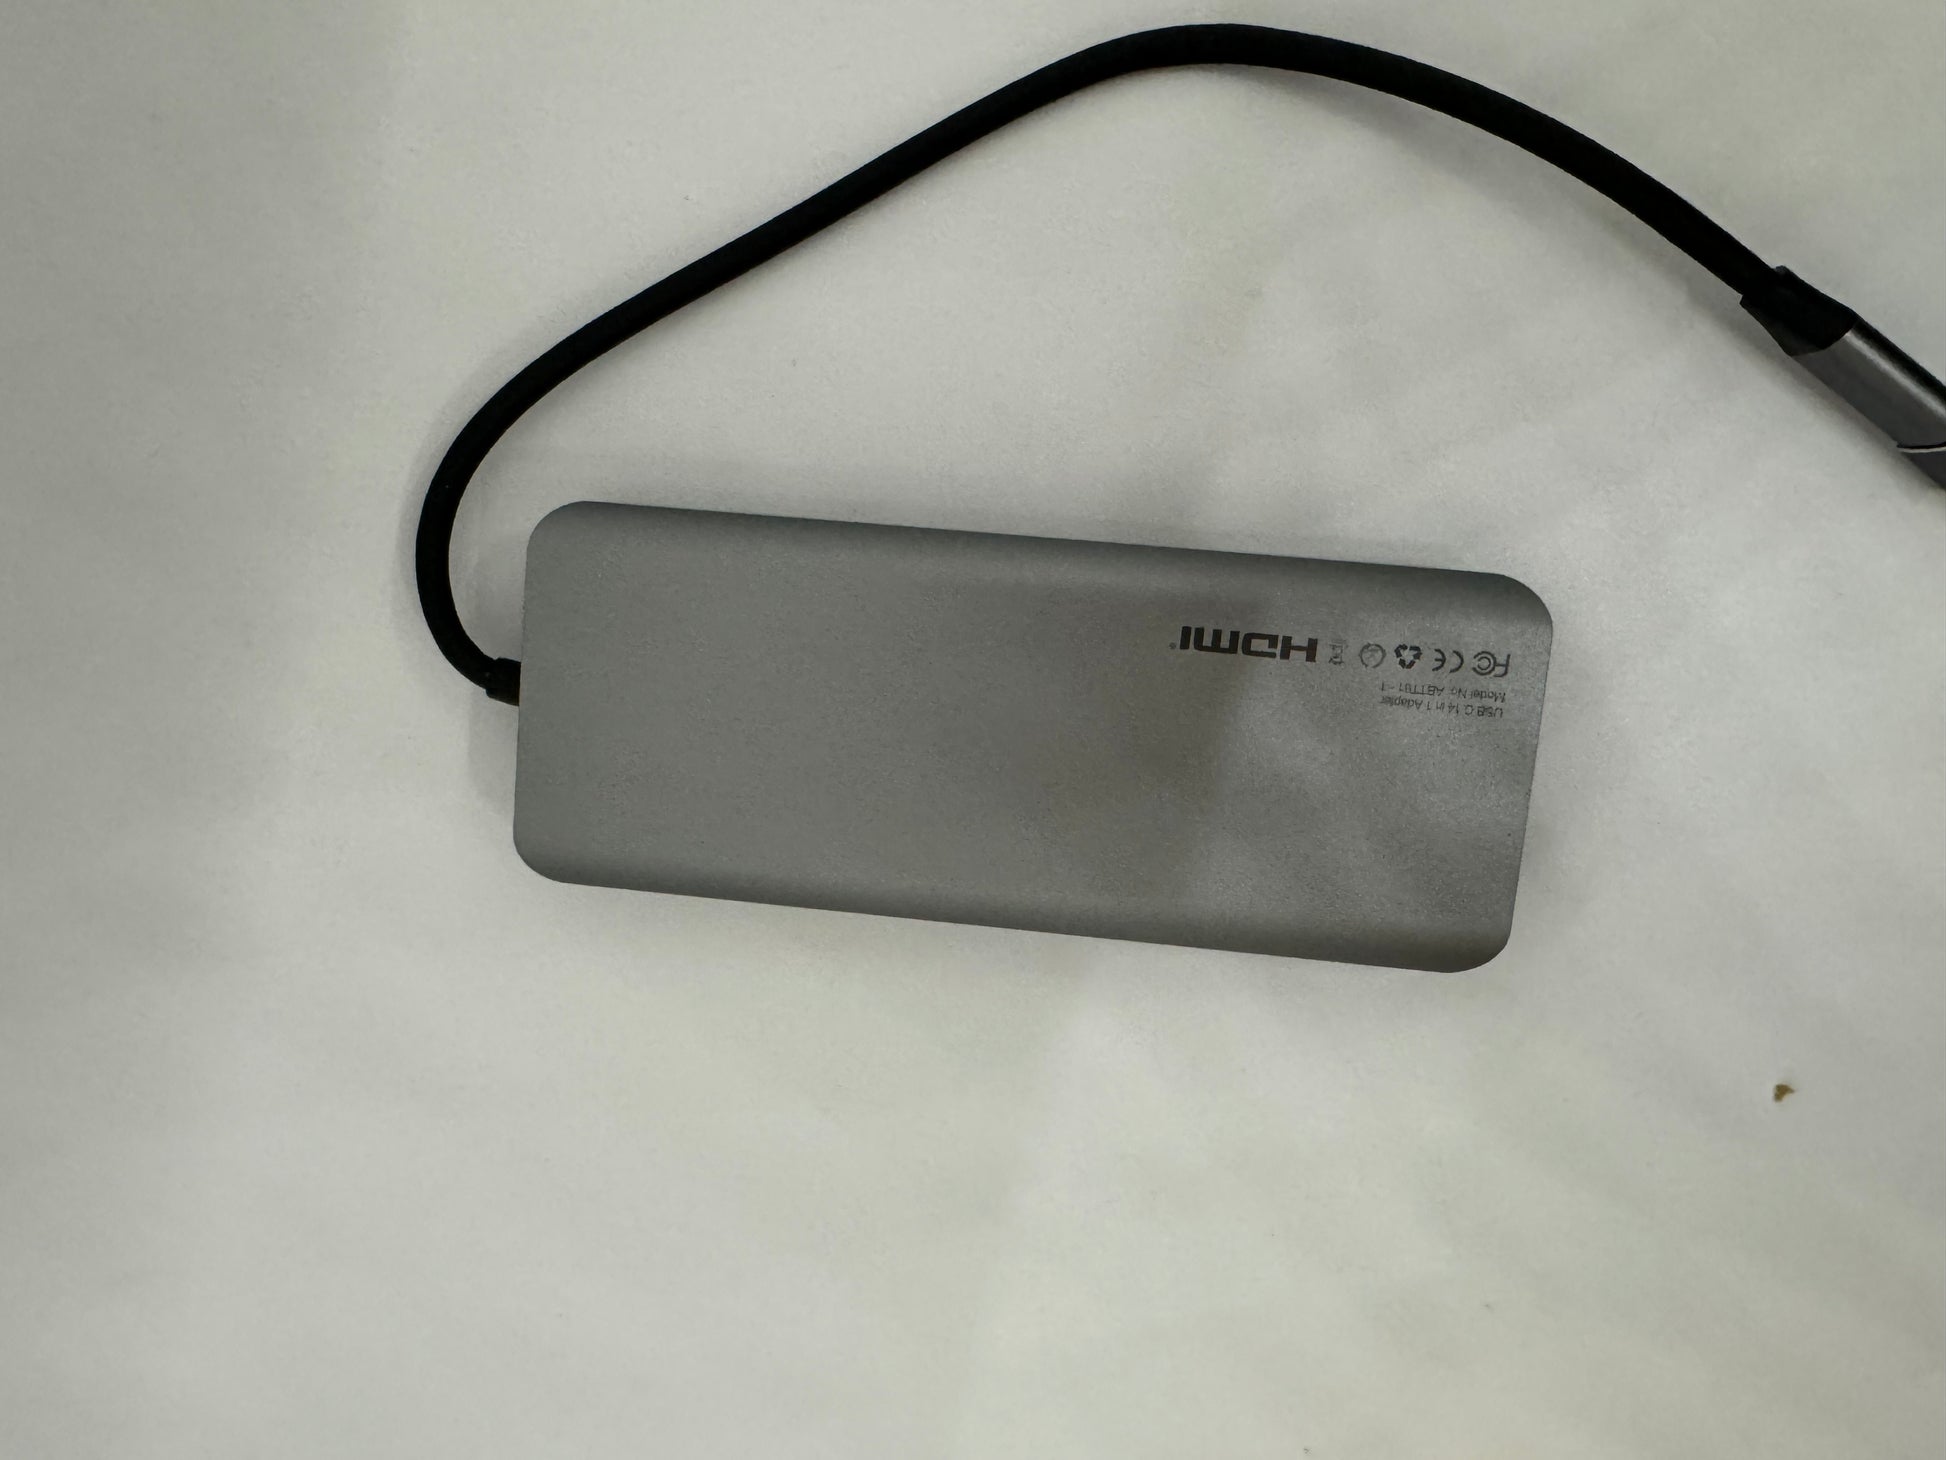 The picture shows a rectangular, grey object with rounded corners. It appears to be a portable electronic device, possibly a power bank or an external hard drive. There is a black cable attached to it. The device has text on it which reads "IWCH" followed by some symbols. Below that, there is some smaller text which is not very clear, but it seems to include "MADE IN CHINA". The background is white with a slight texture.